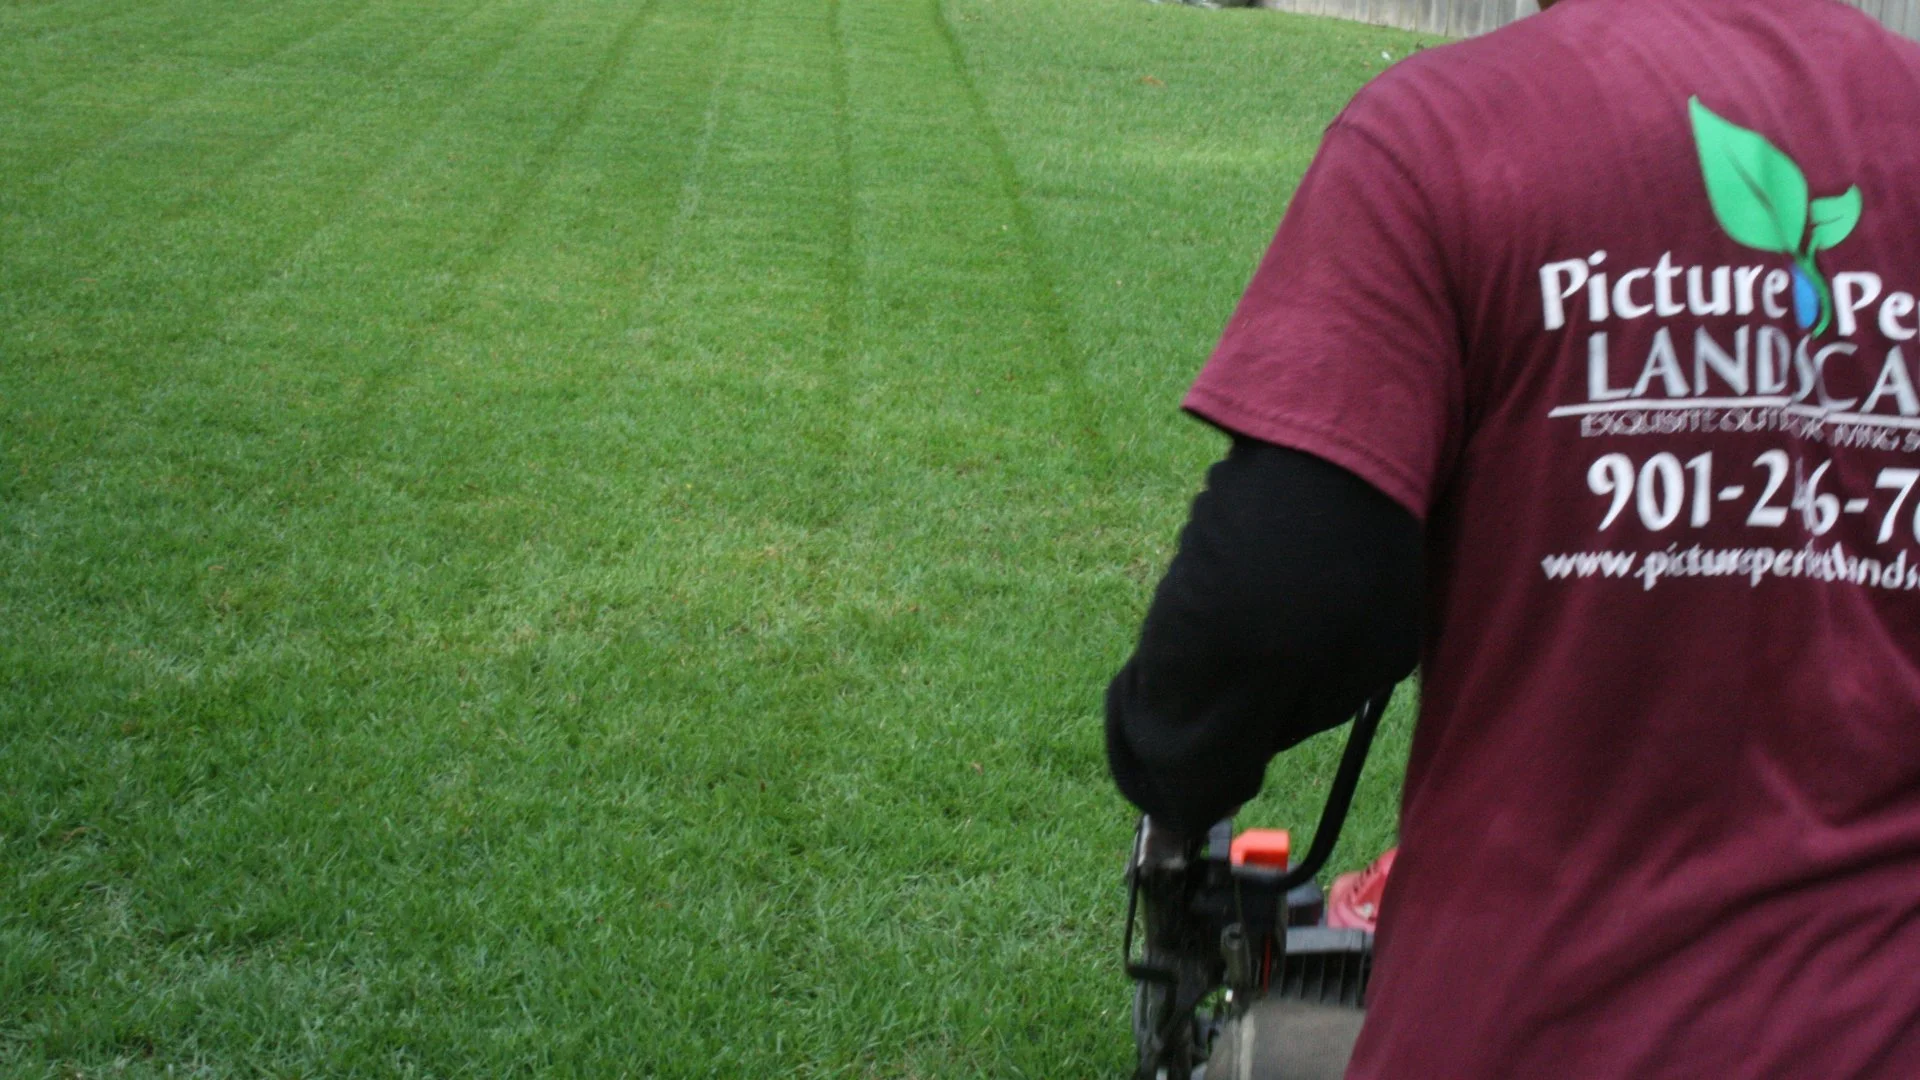 Bagging Your Grass Clippings vs Leaving Them - Which Is Better After Mowing?